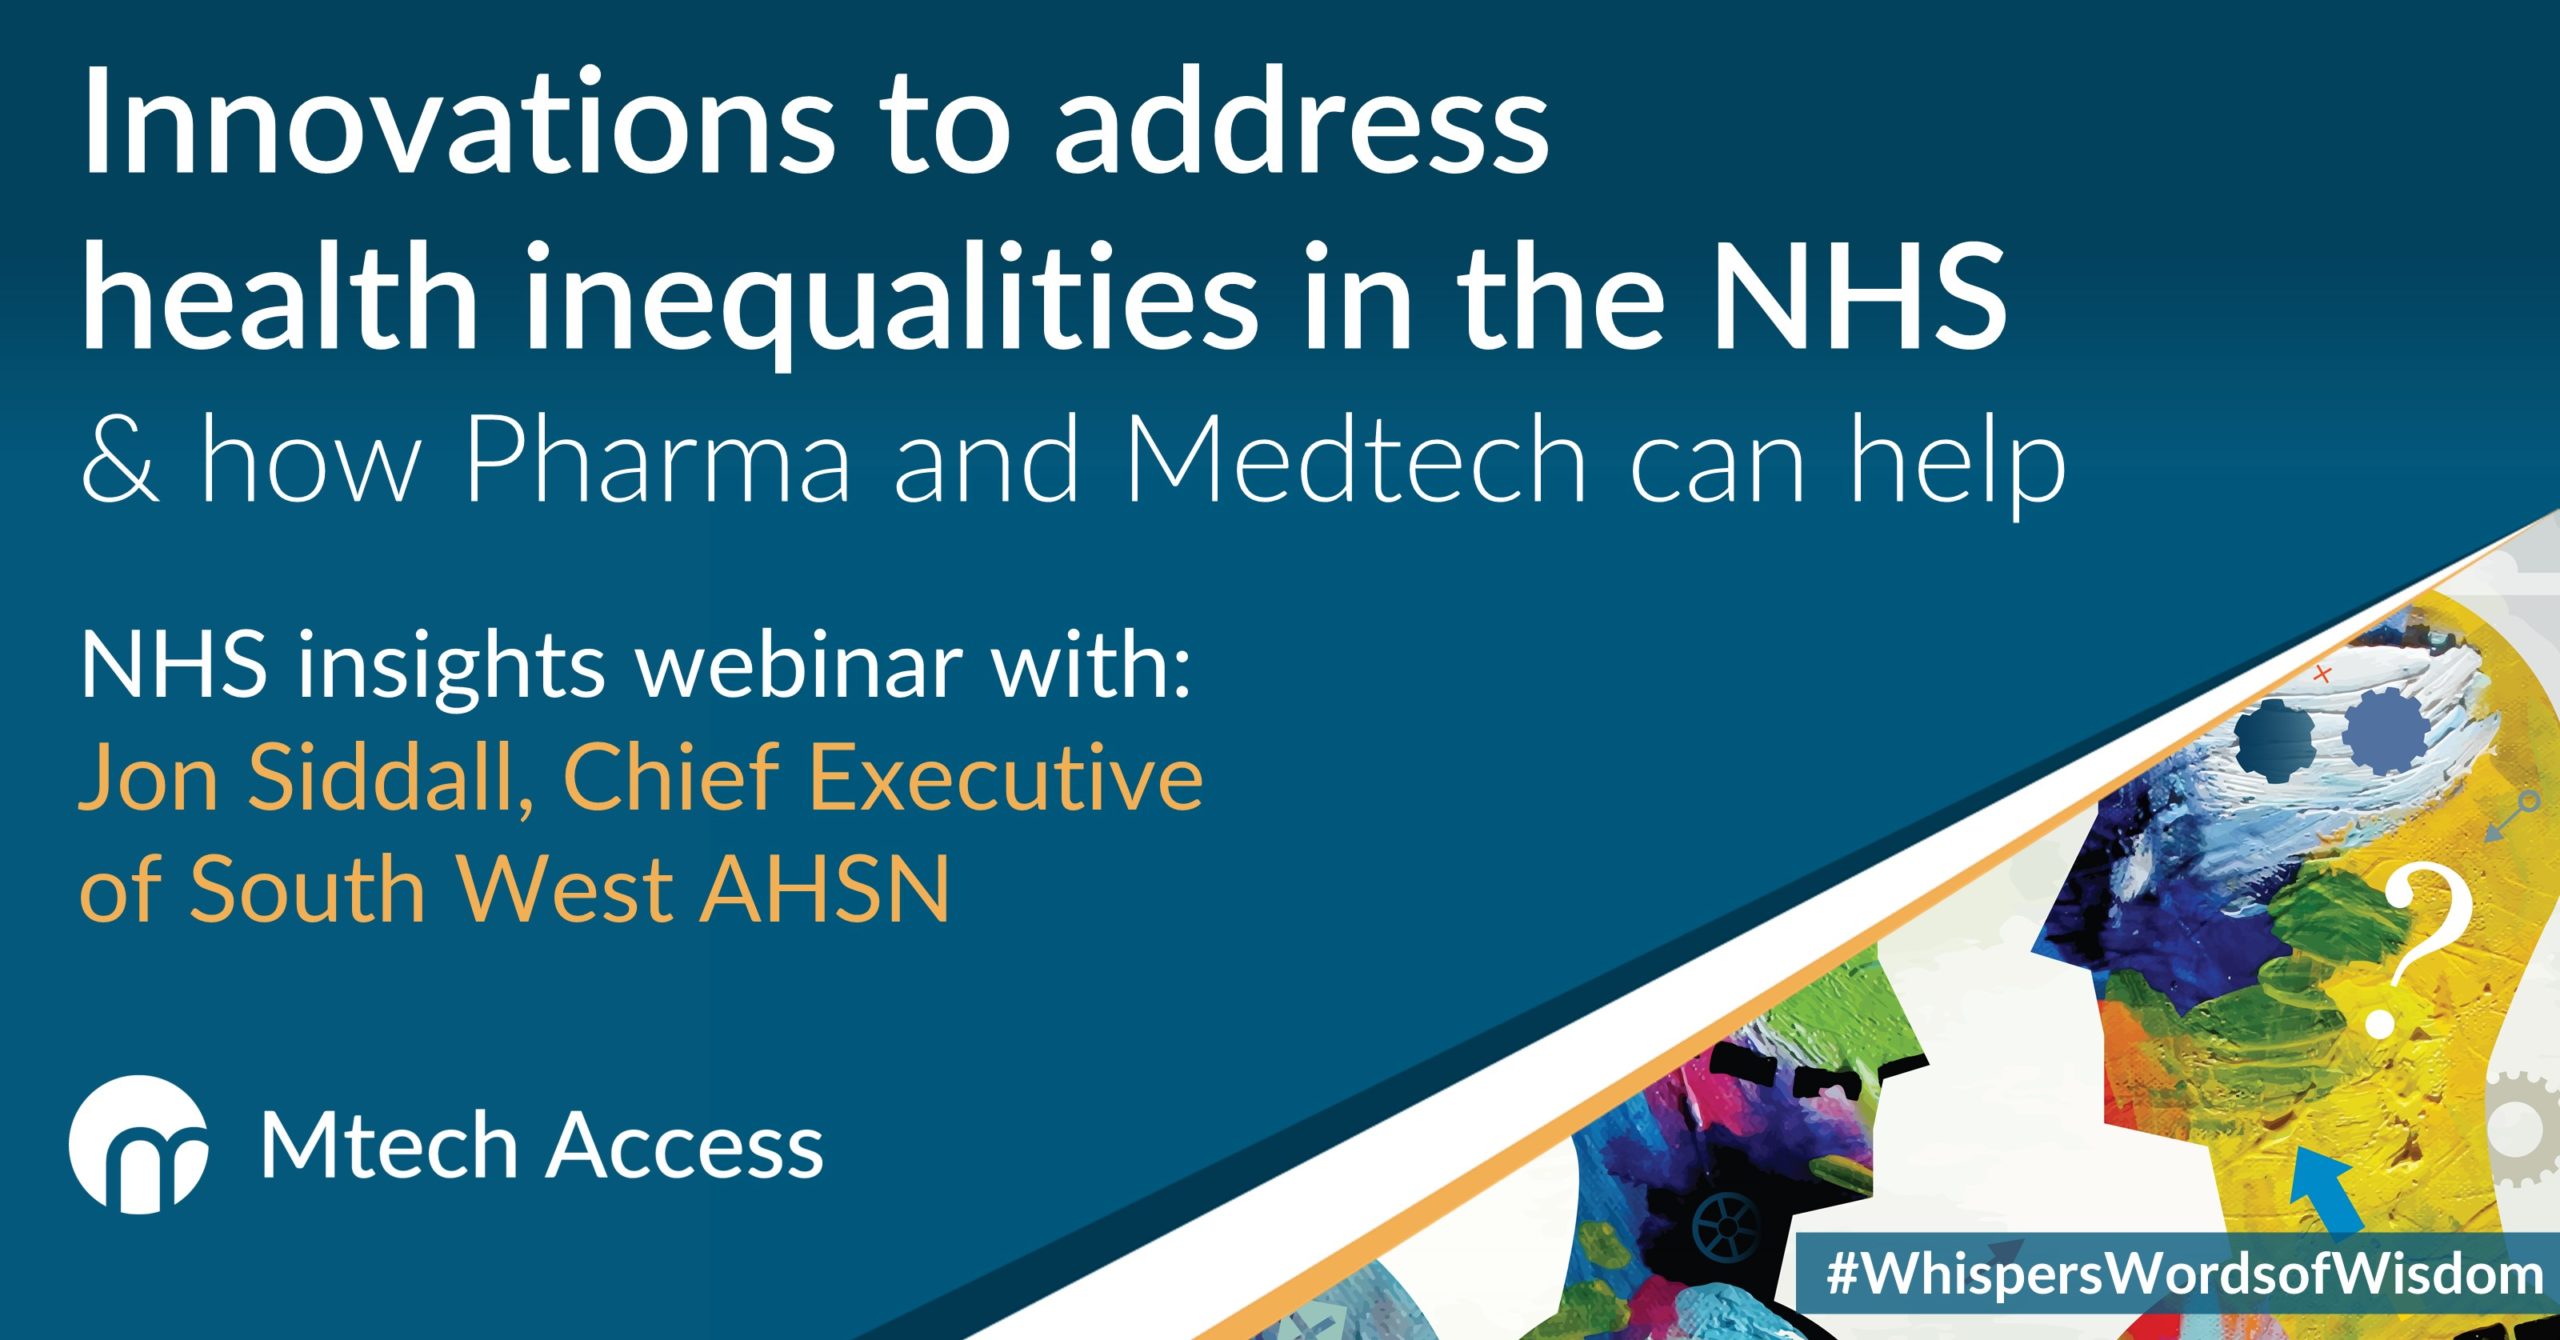 Innovations to address health inequalities in the NHS & how Pharma and Medtech can help